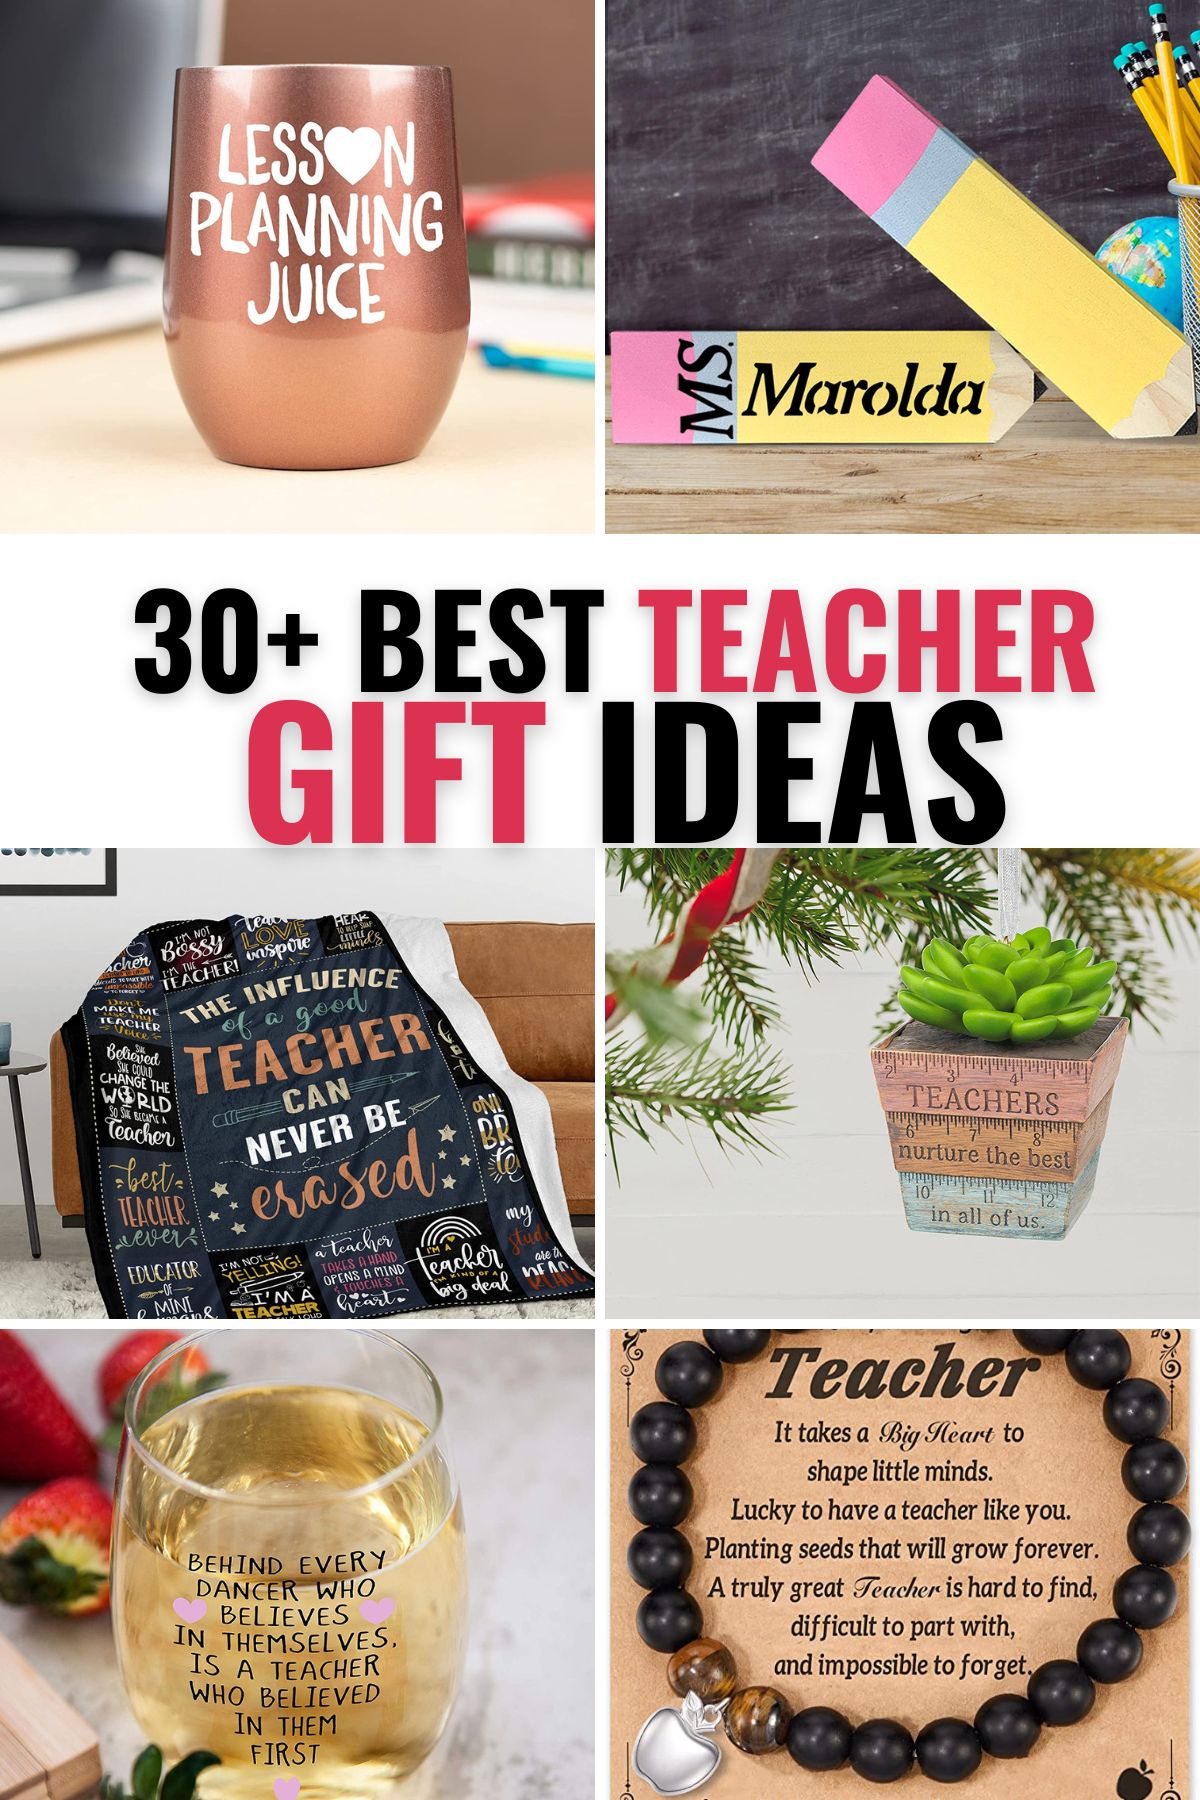 50 best teacher gift ideas - what they REALLY want and what they don't!